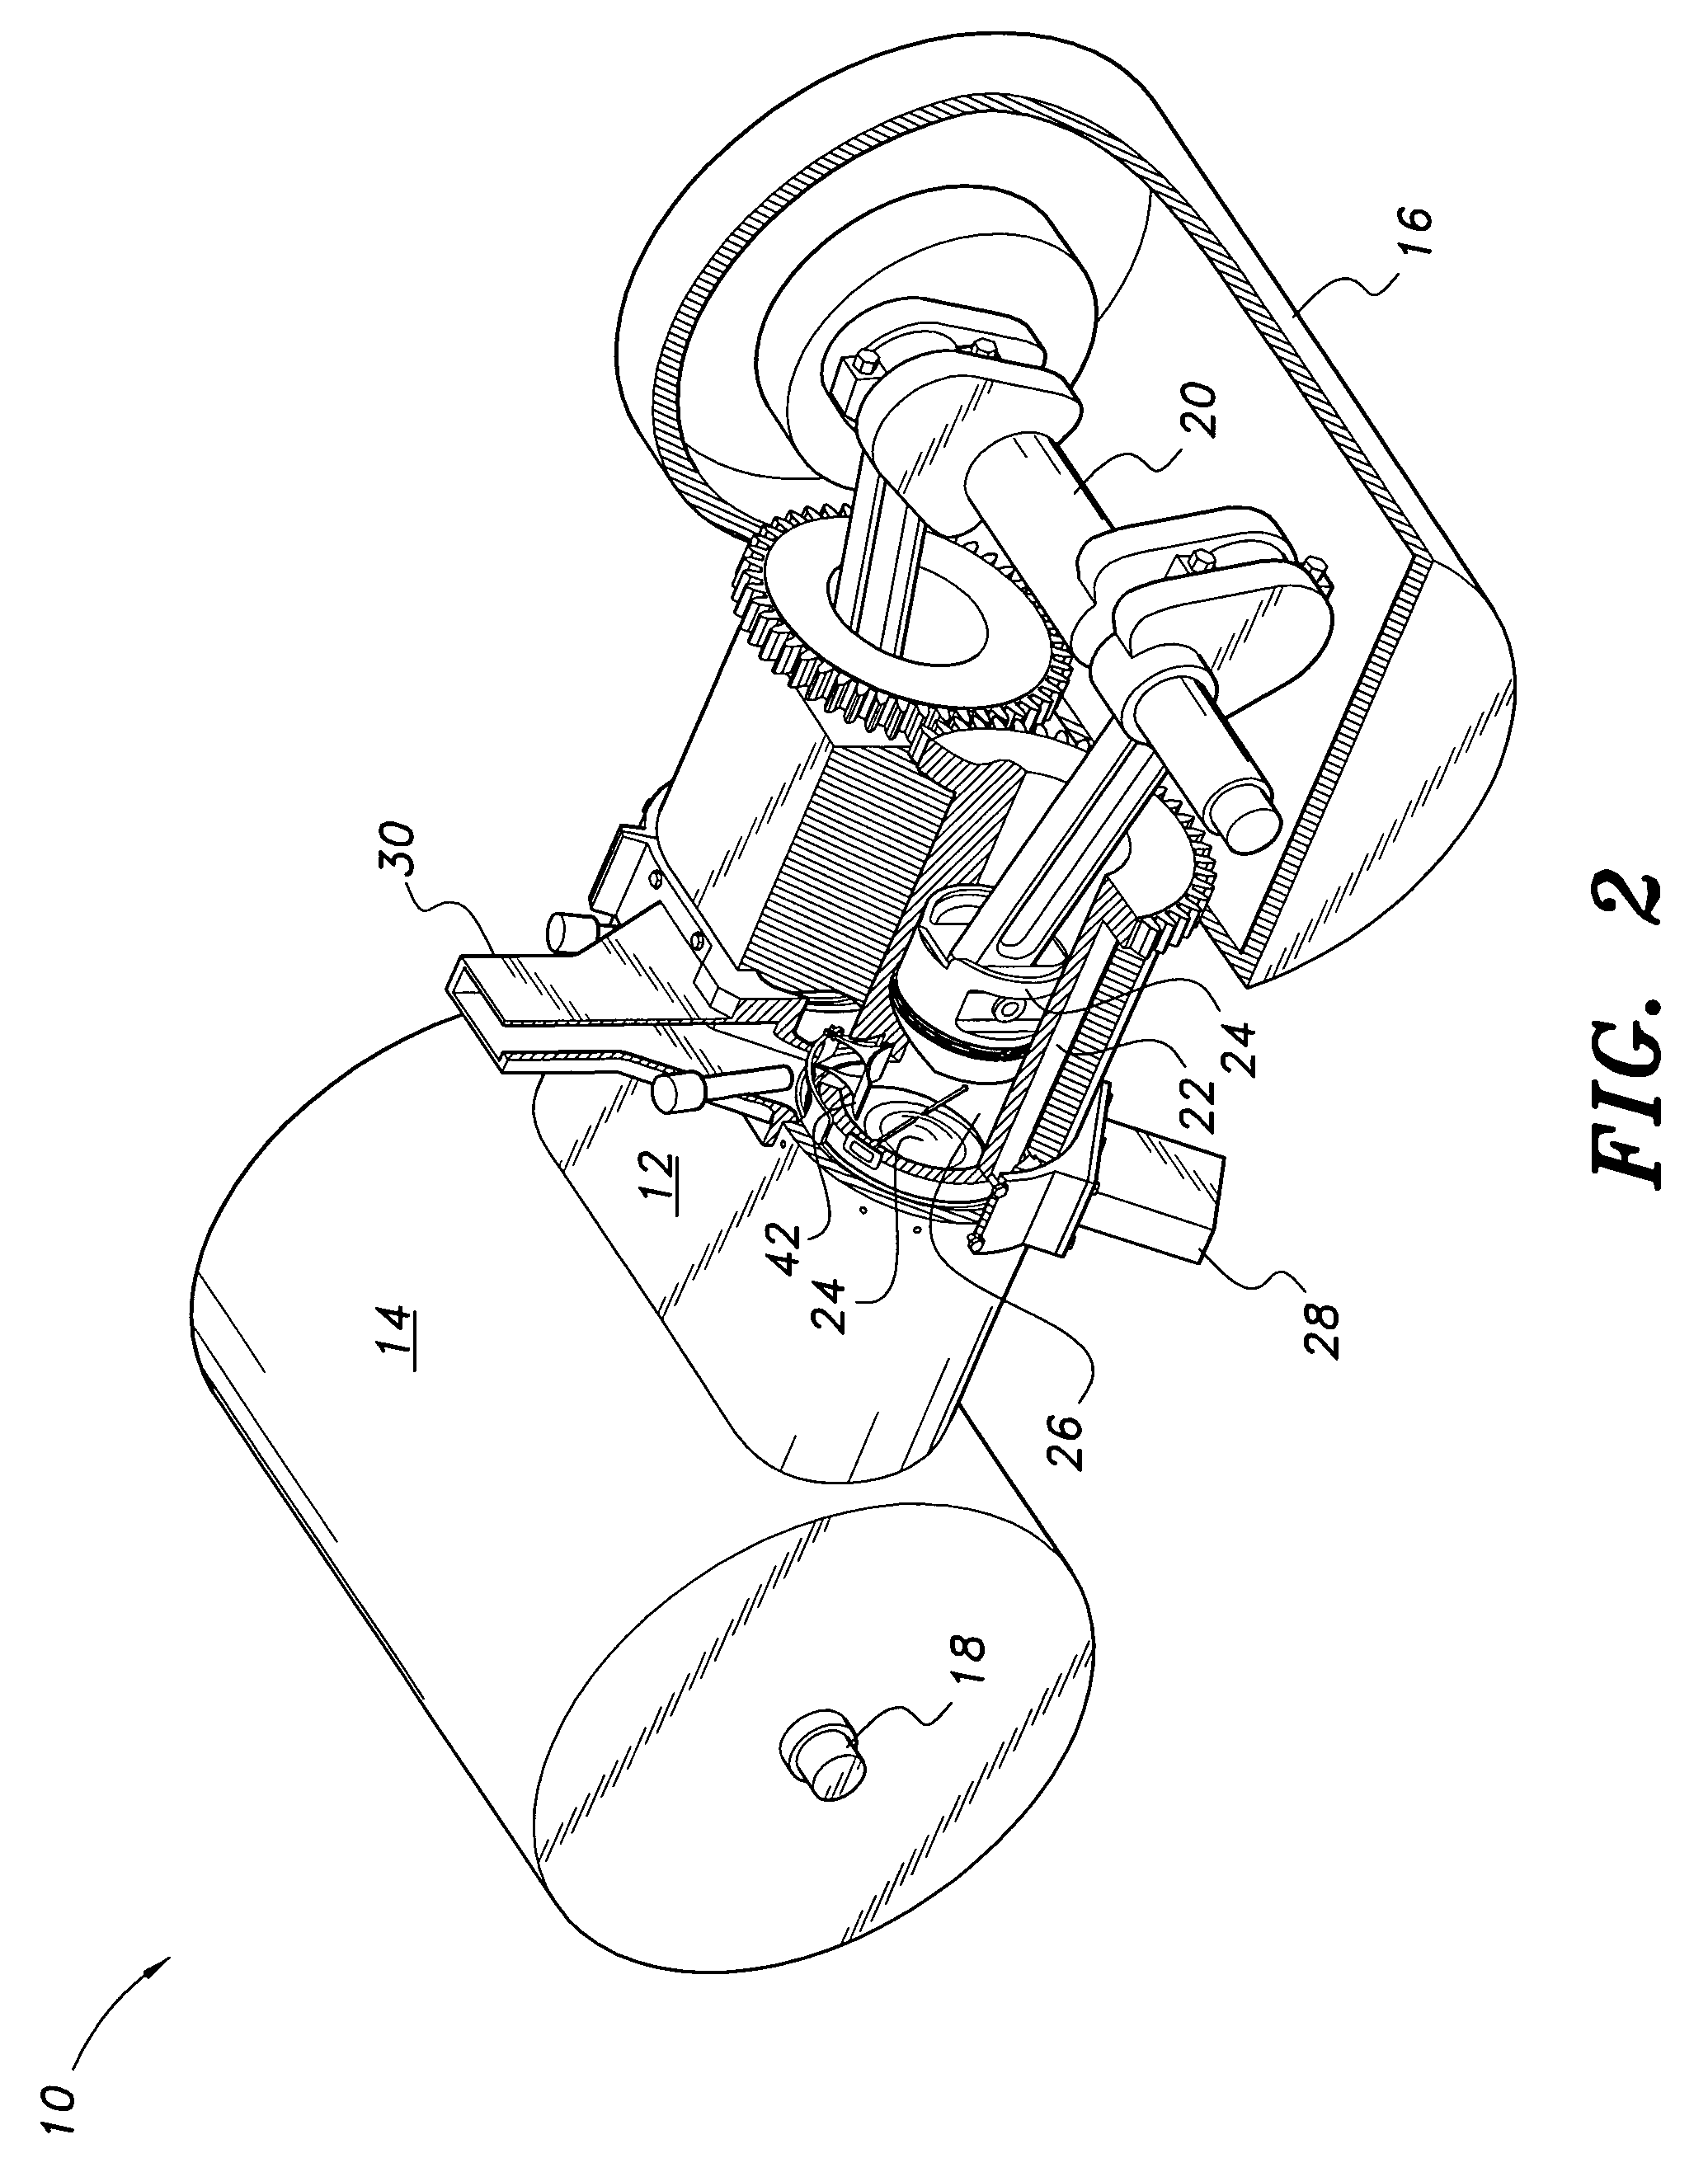 Valve system for opposed piston engines